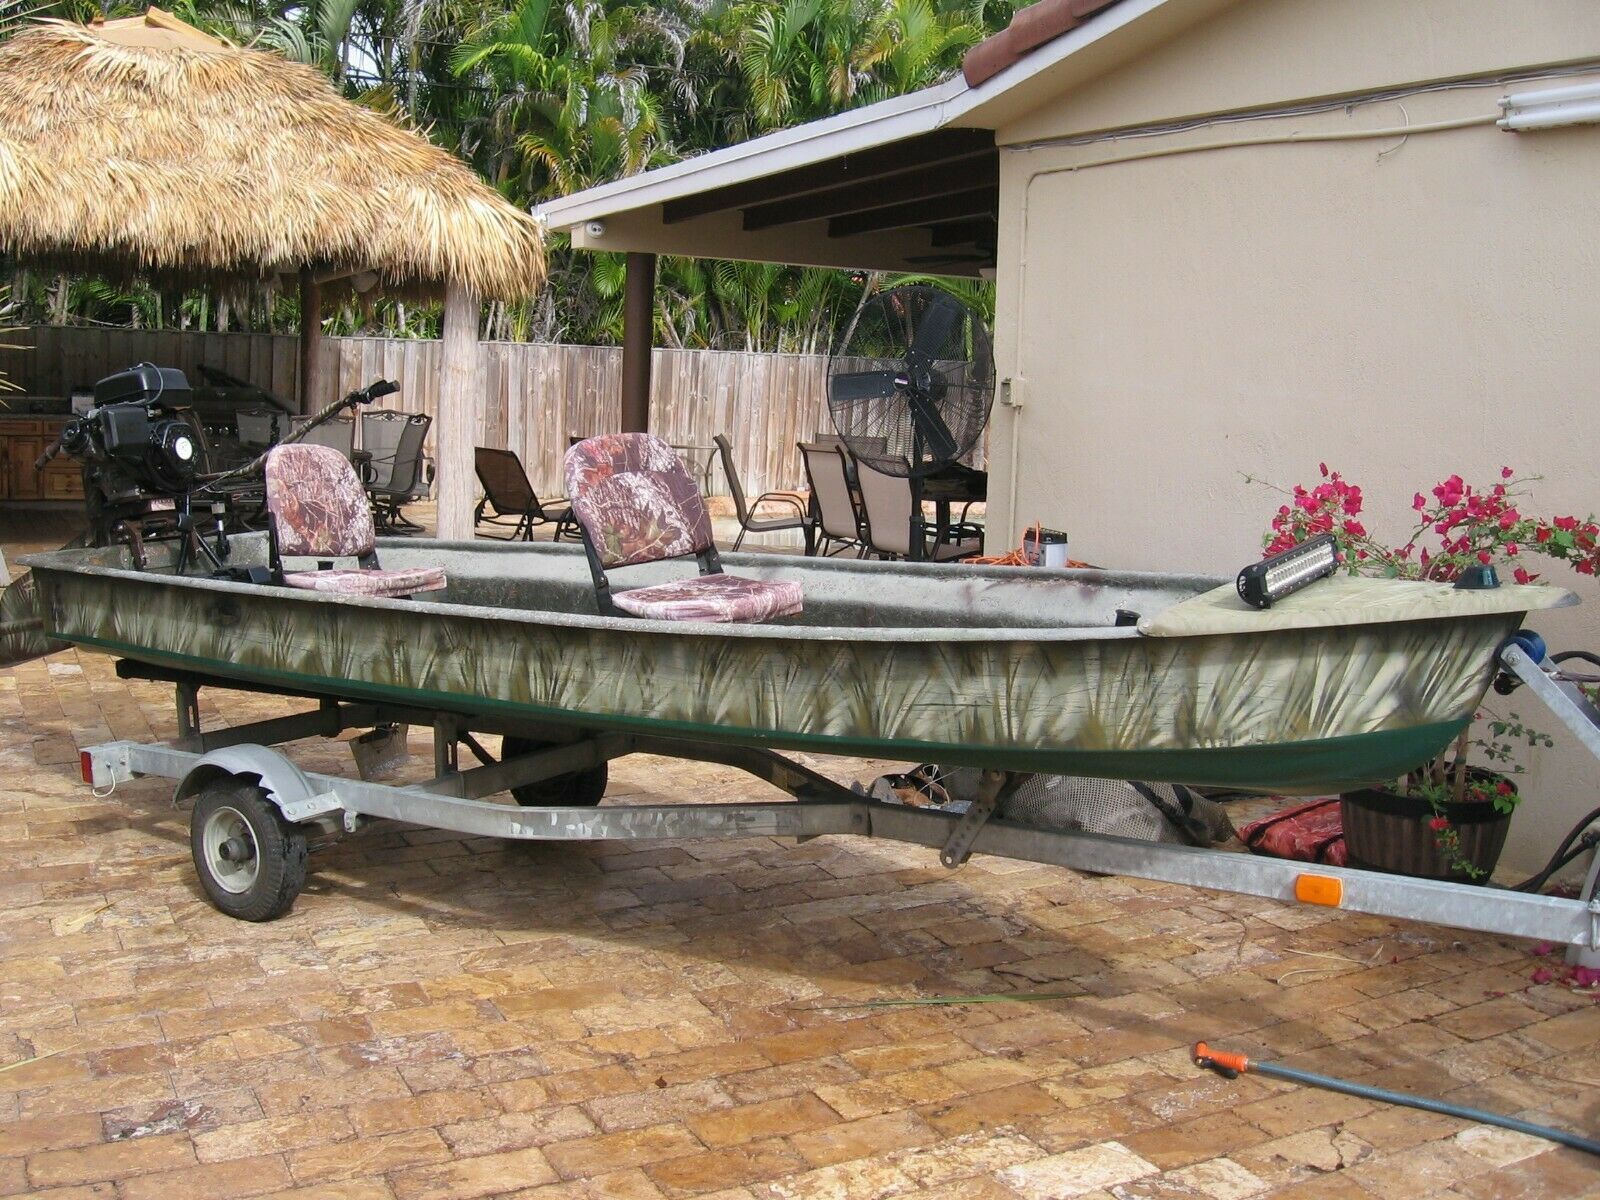 wigeon duck boat wigeon 14.4 2012 for sale for ,950